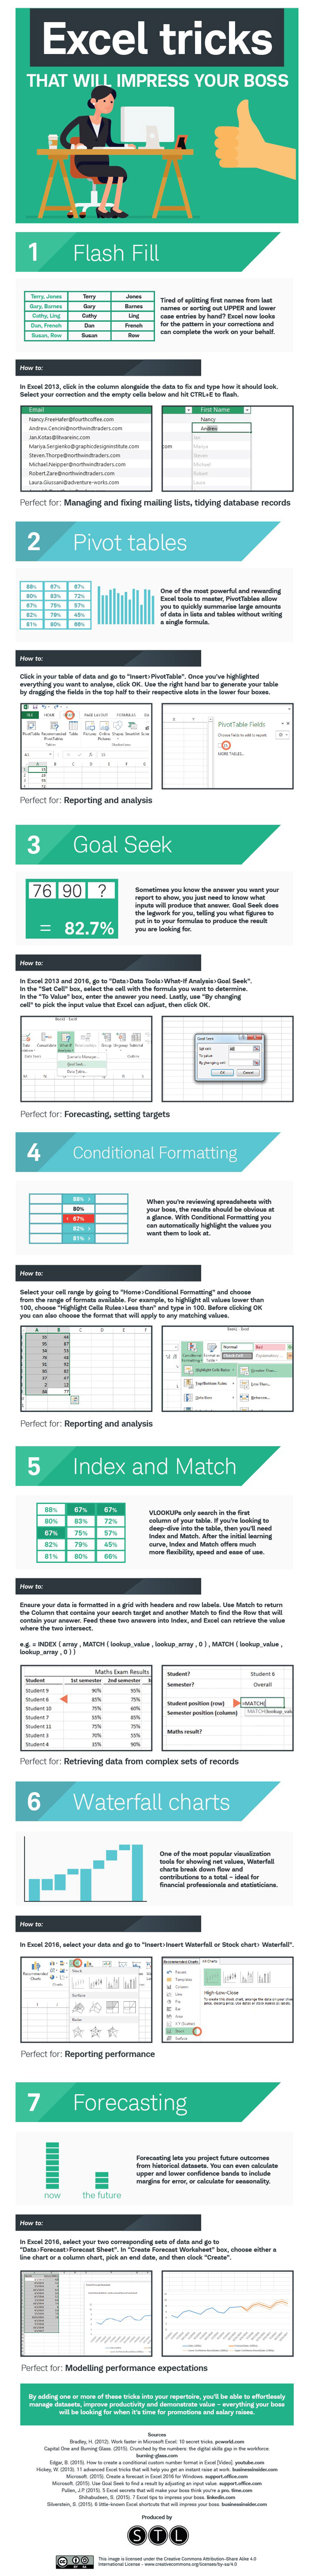 Excel Tricks that will Impress Your Boss Infographic